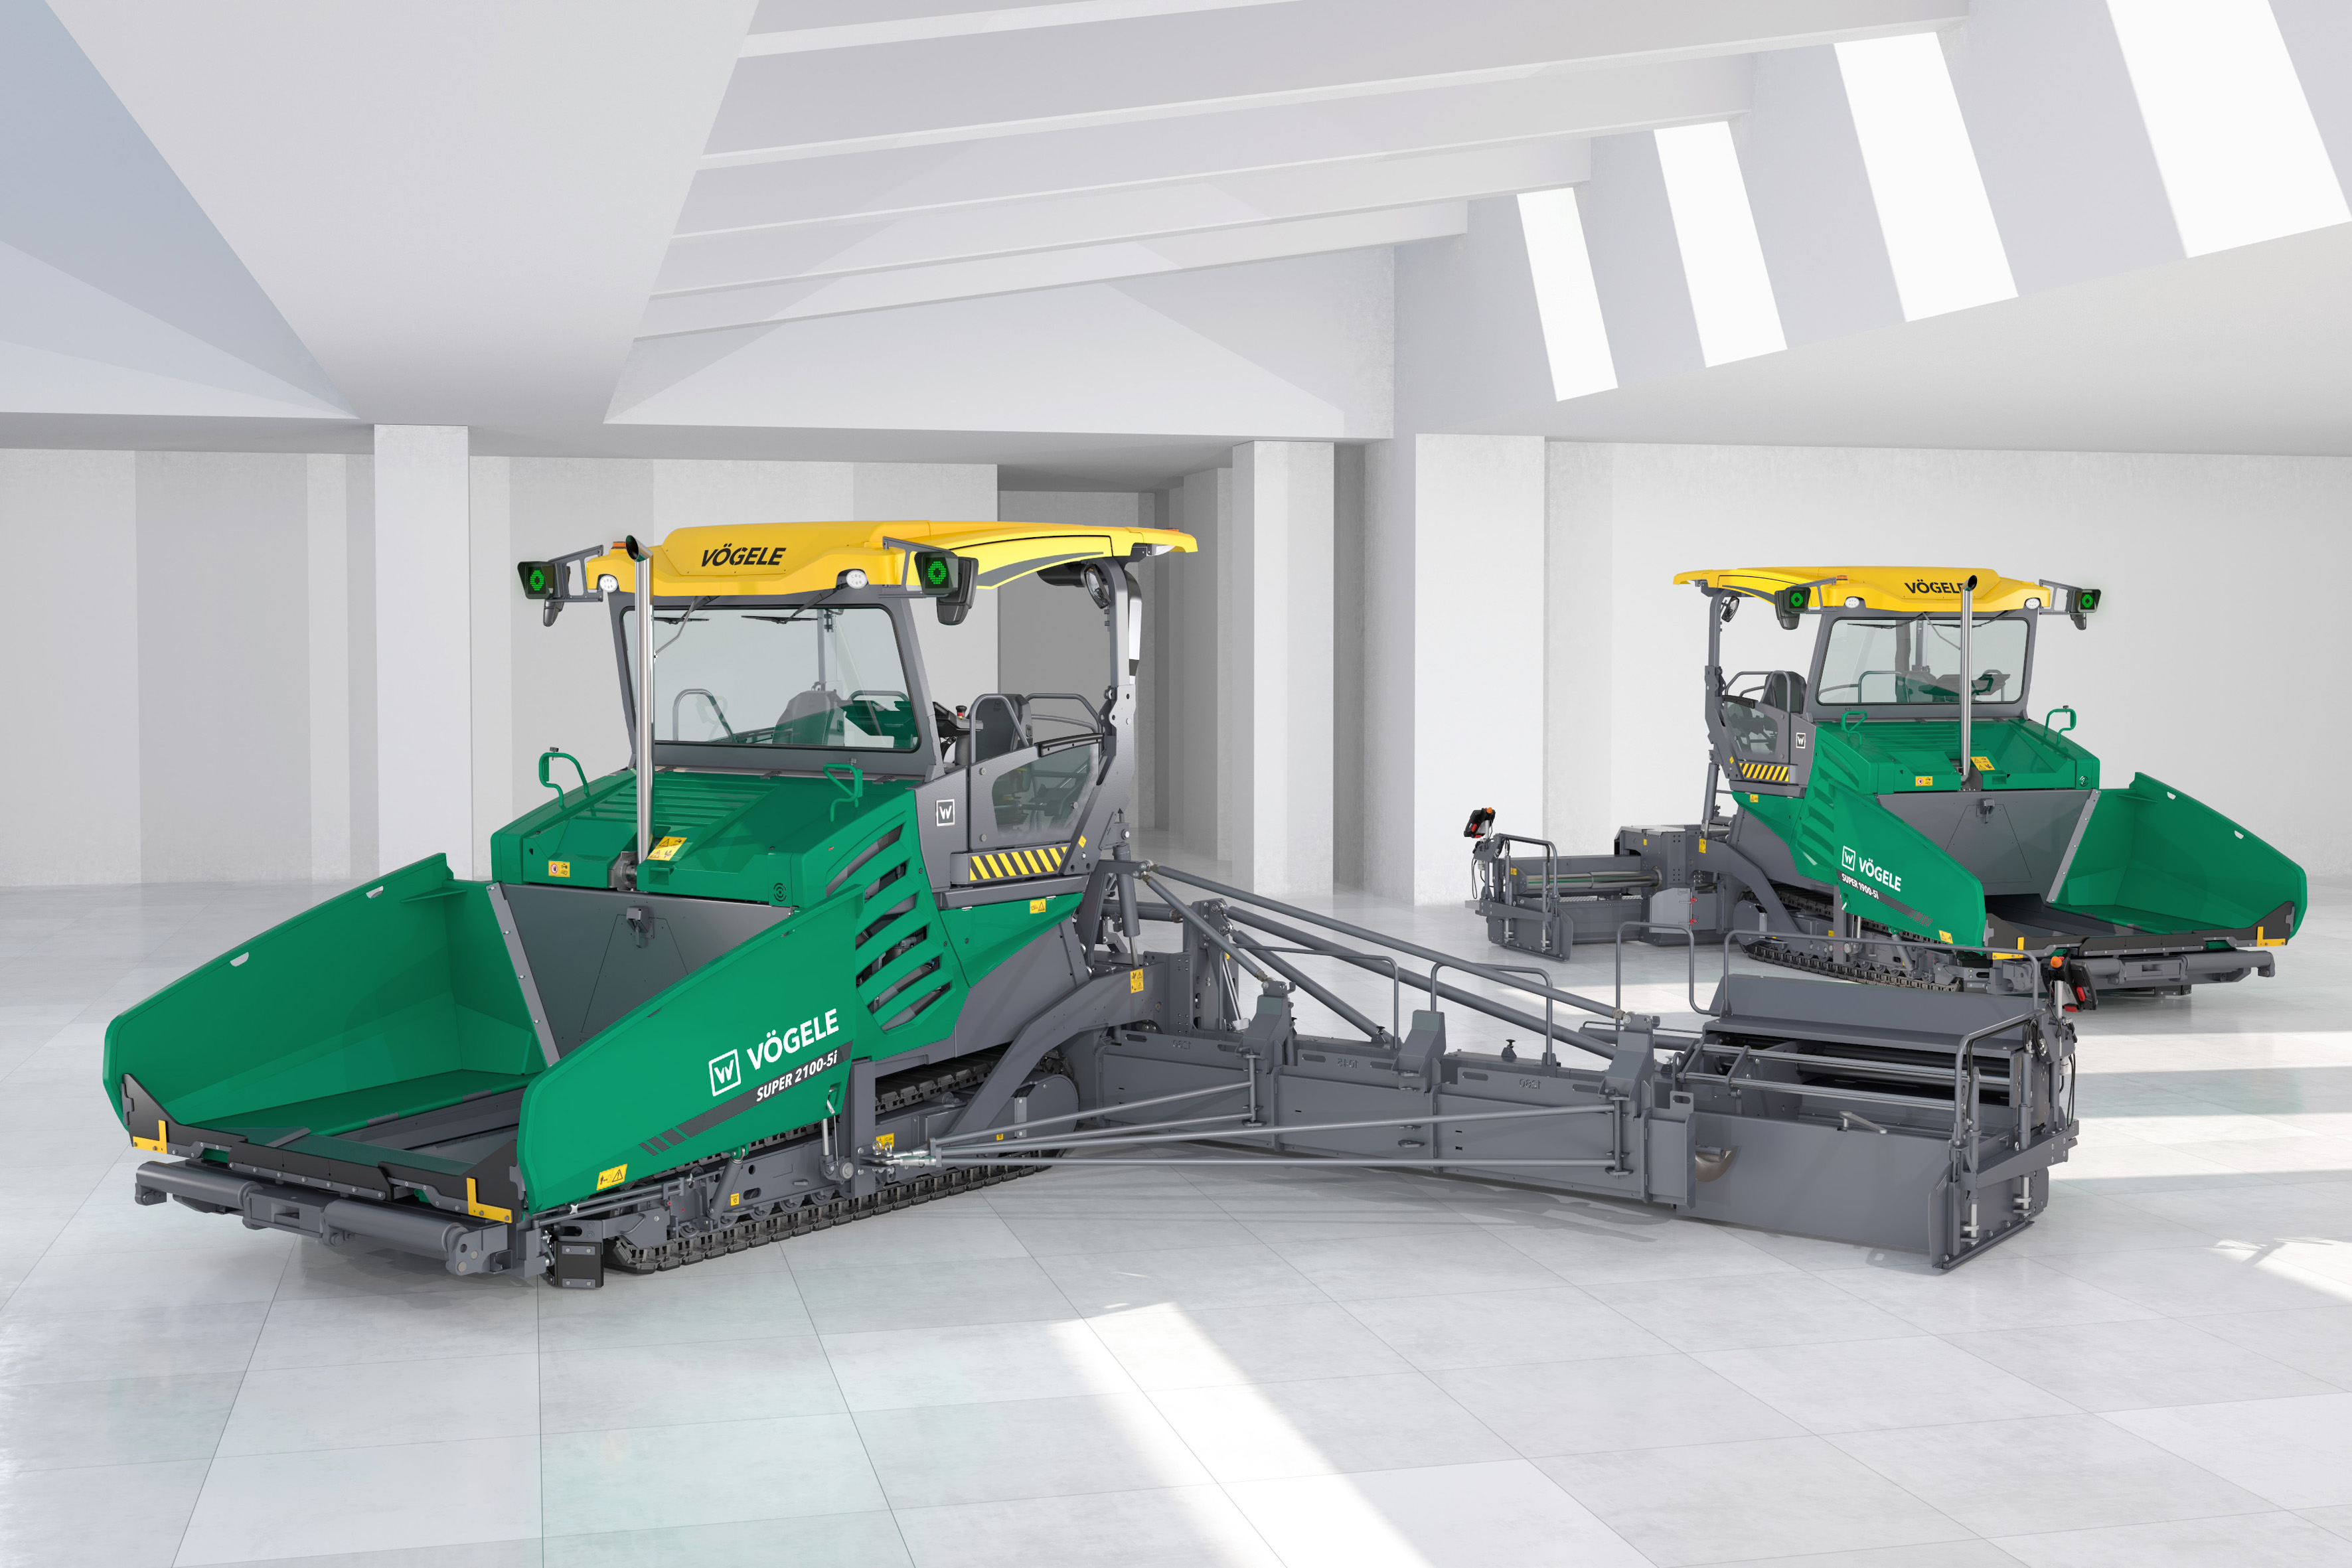 World premiere at Bauma 2022: the SUPER 1900-5(i) and SUPER 2100-5(i) Highway Class pavers from Vögele.